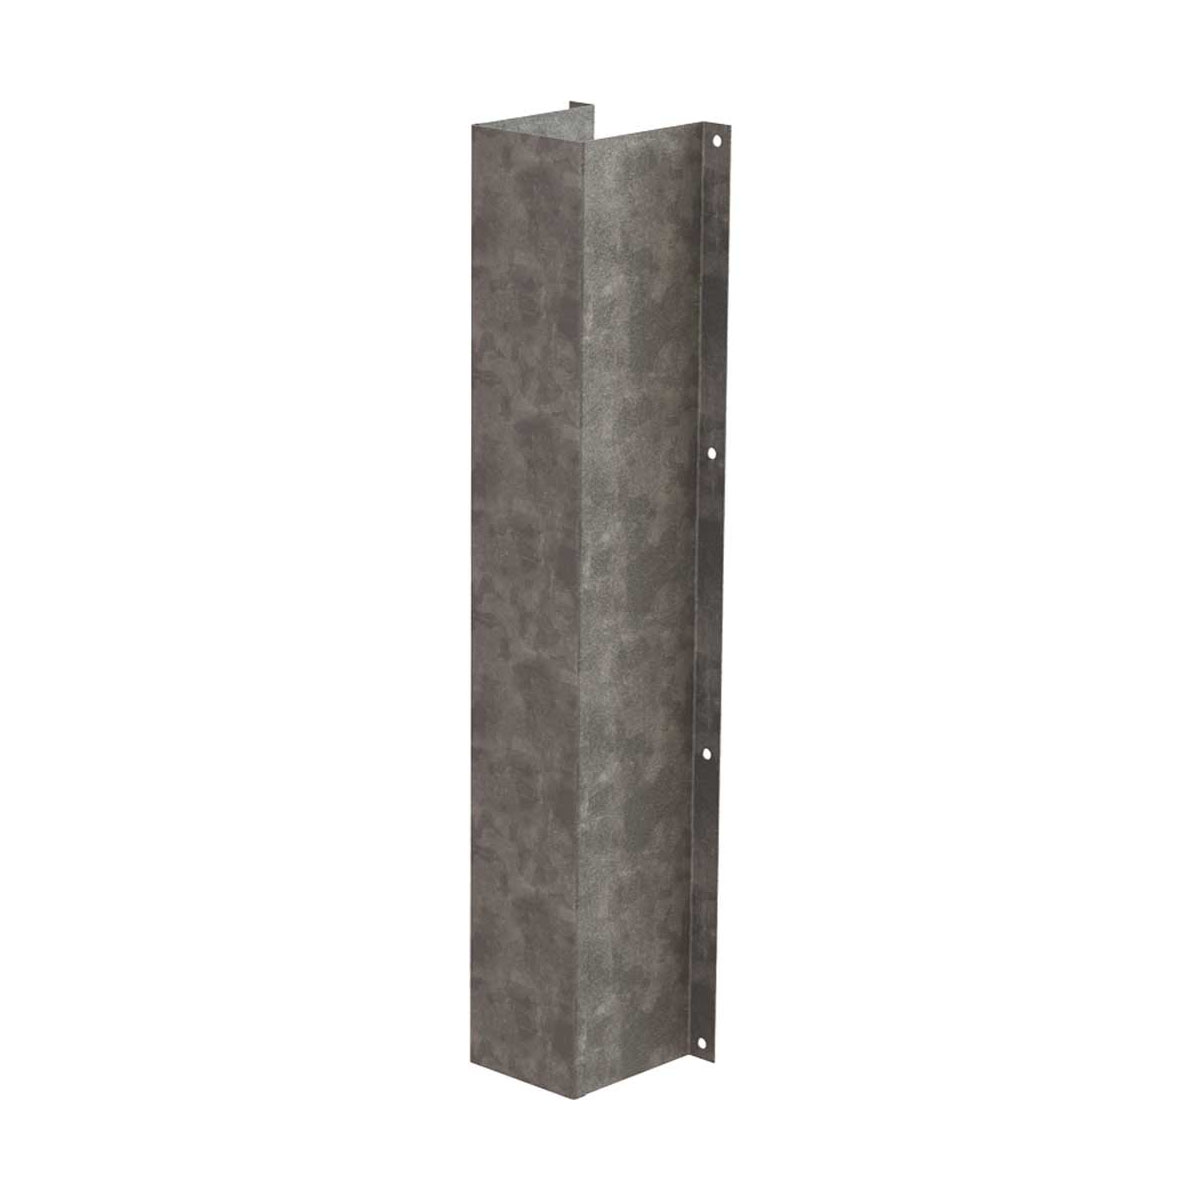 Buy Downpipe Protector - Square (Galvanised) in Downpipe Protectors from GuardX available at Astrolift NZ